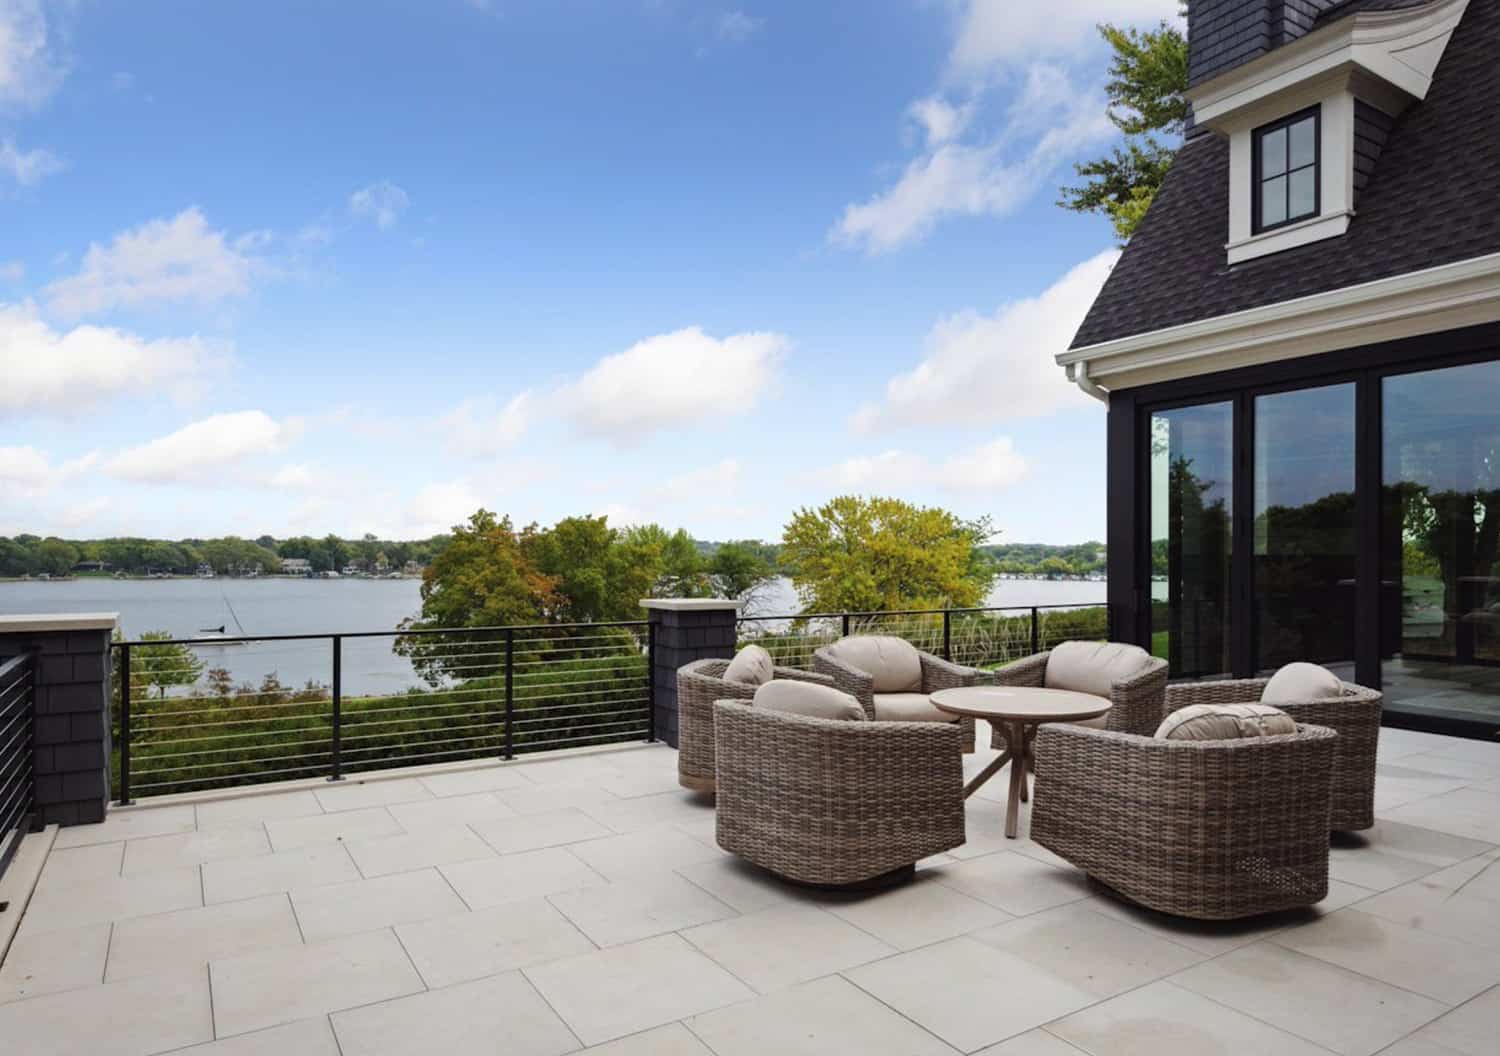 transitional-style-home-exterior-patio-looking-out-to-lake-minnetonka